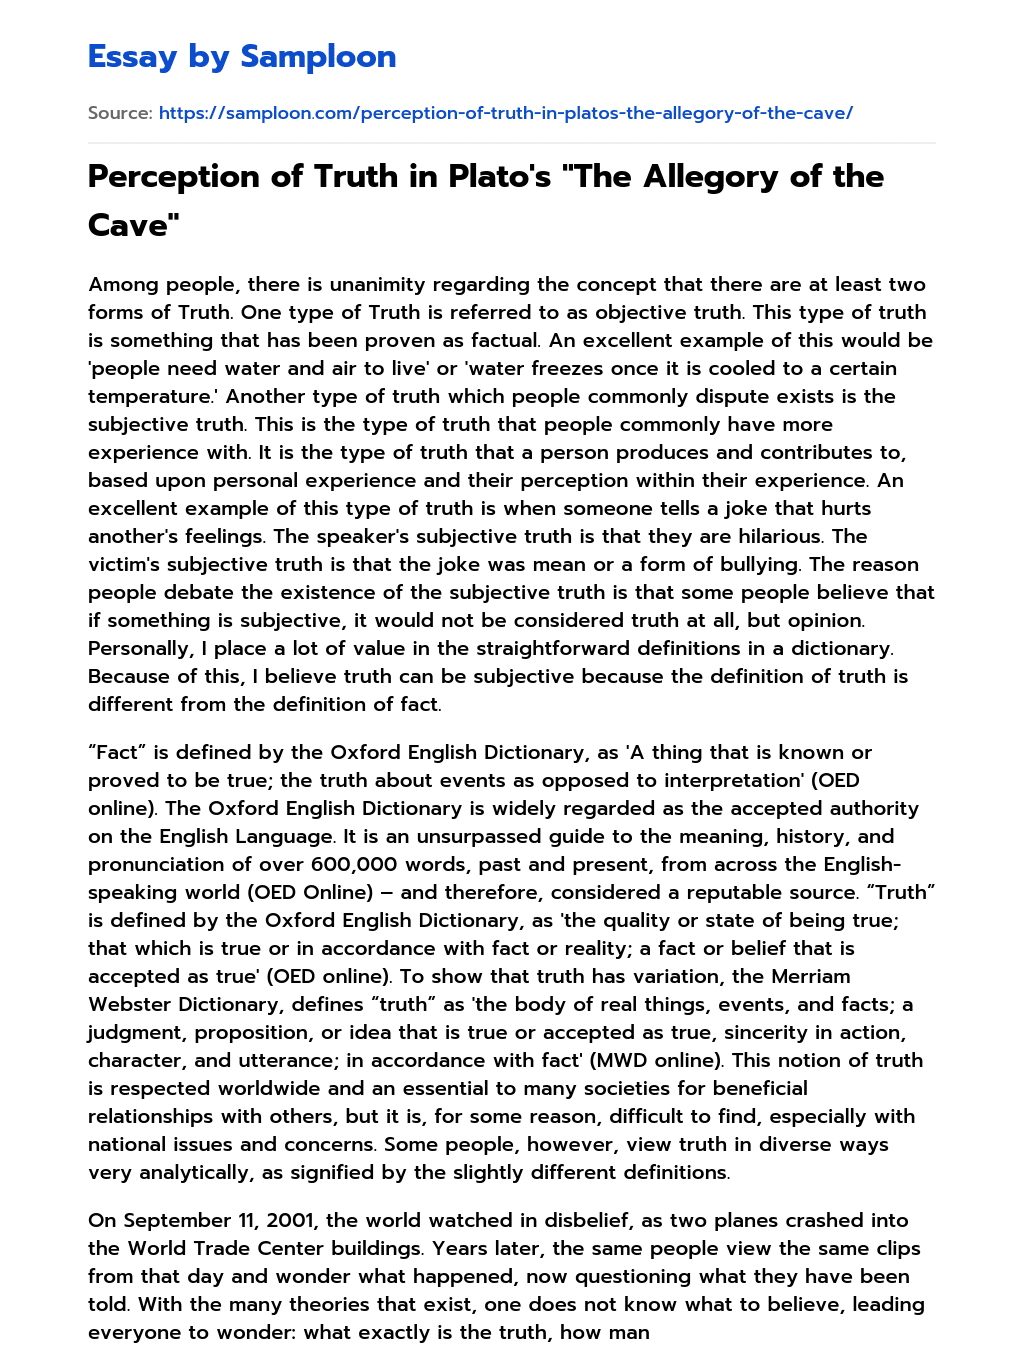 Perception of Truth in Plato’s “The Allegory of the Cave” essay